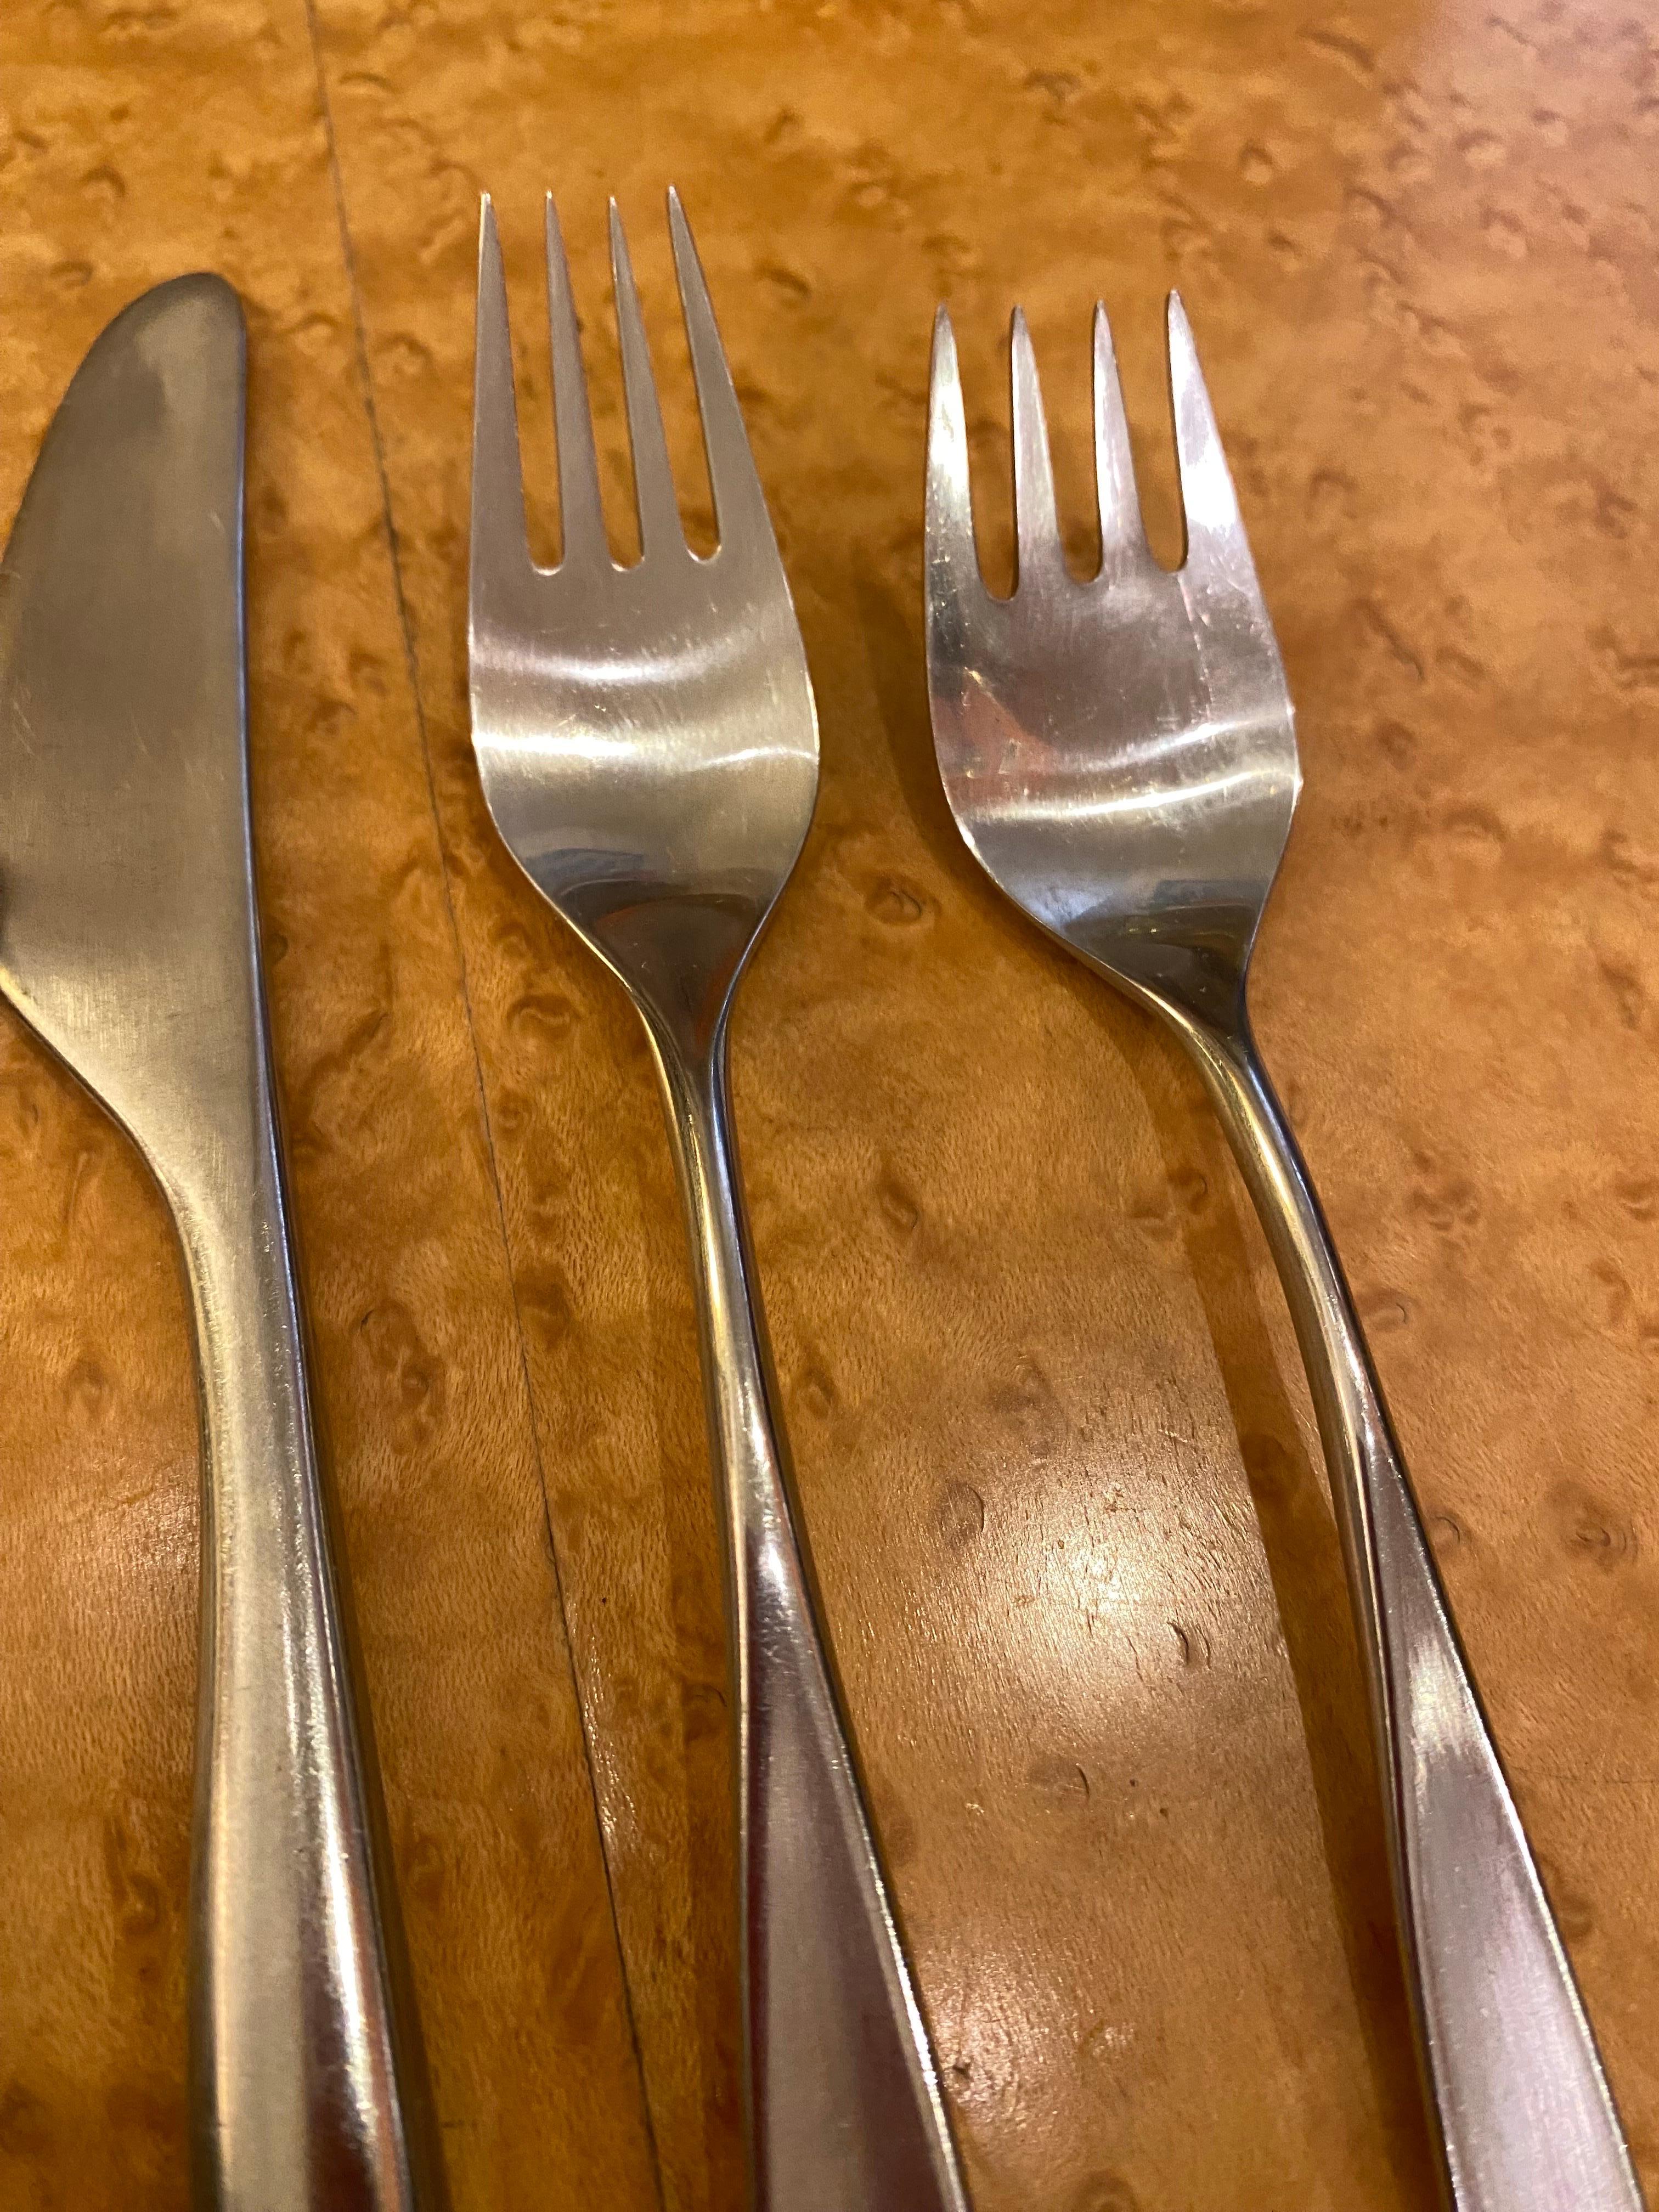 Don Wallance for Lauffer design 2 stainless steel flatware set. Service for 8 Set includes dinner fork, salad fork, Dinner Knives, Soup Spoon and Teaspoon. Beautiful Design and weight! Nice Clean Original condition! One Salad Fork shows handle wear